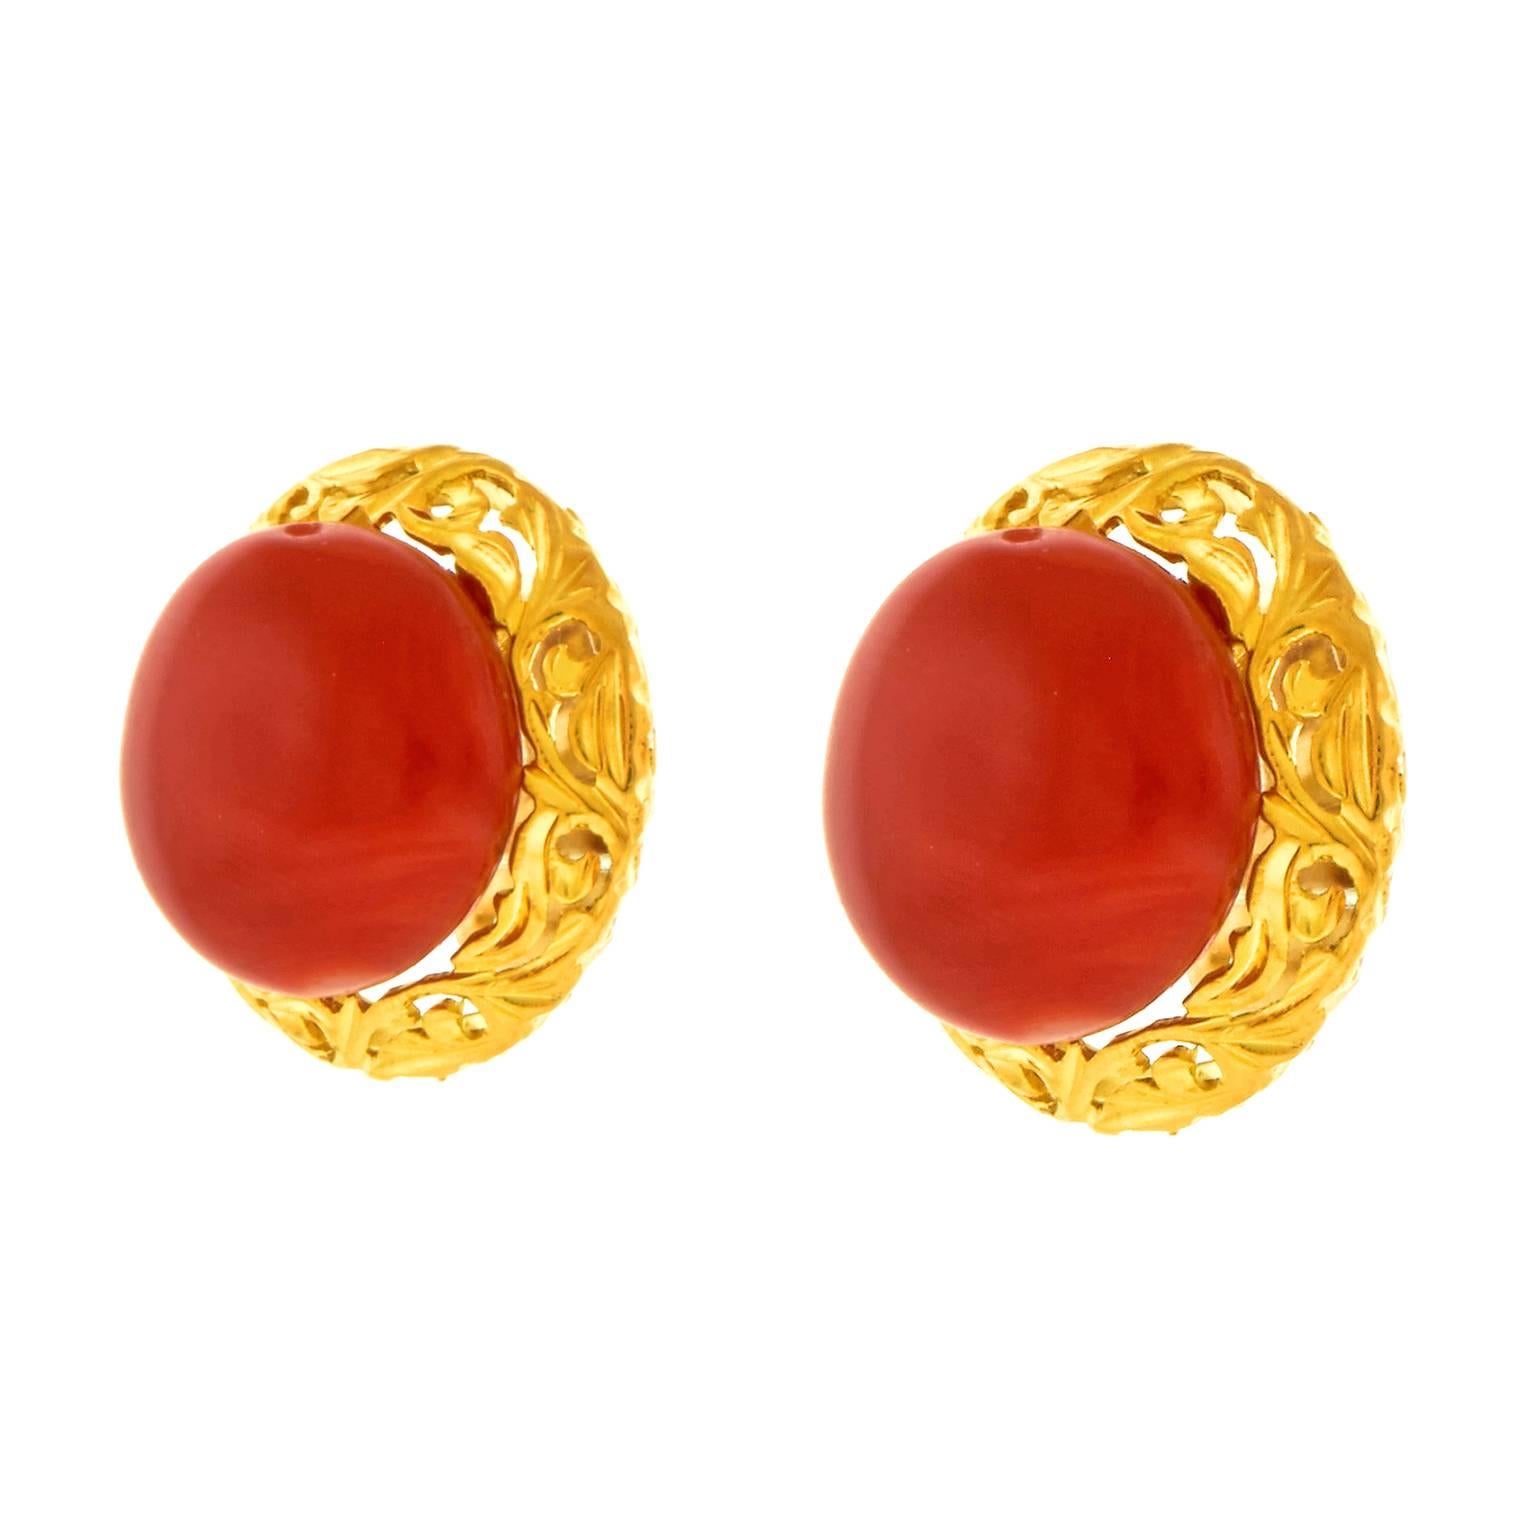 Art Deco Antique Coral Earrings in Gold and Gilded Sterling